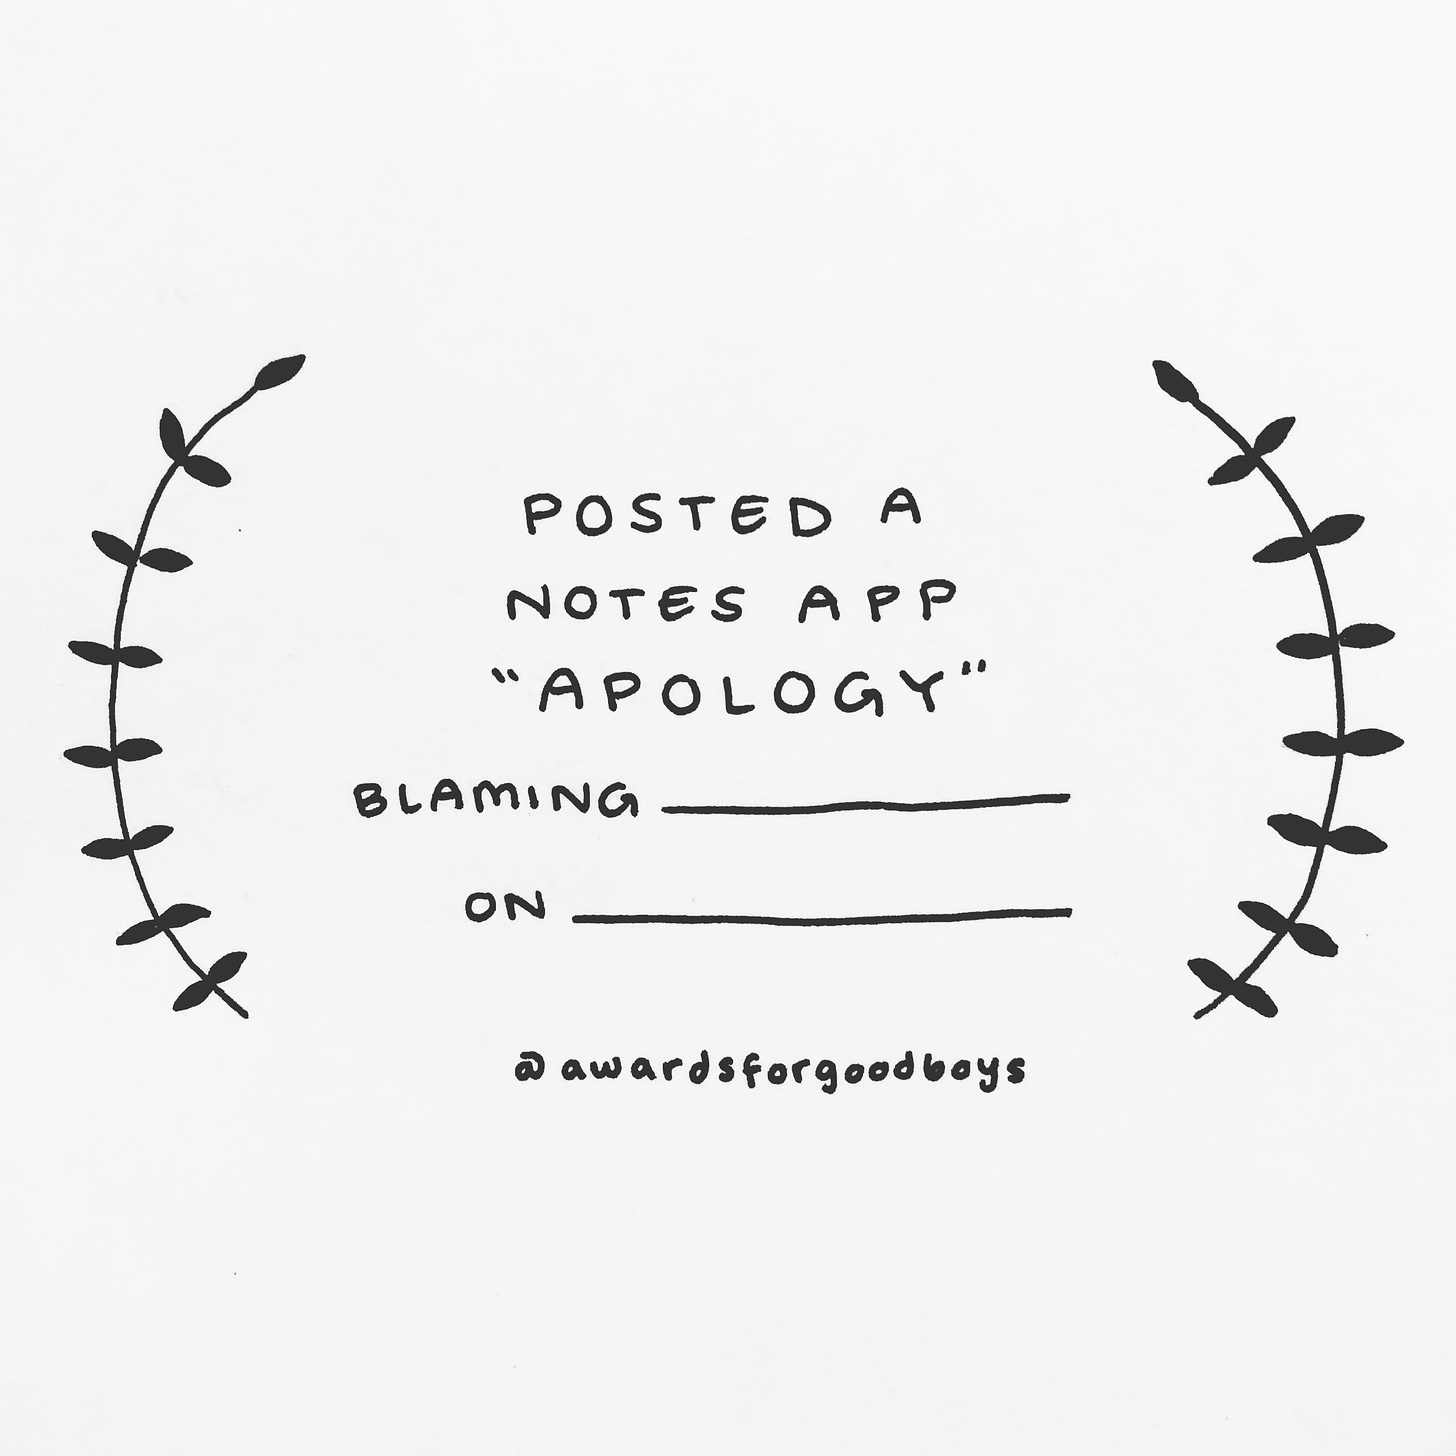 ID: an award with laurel leaves that says "posted a notes app apology blaming [blank] on [blank]'